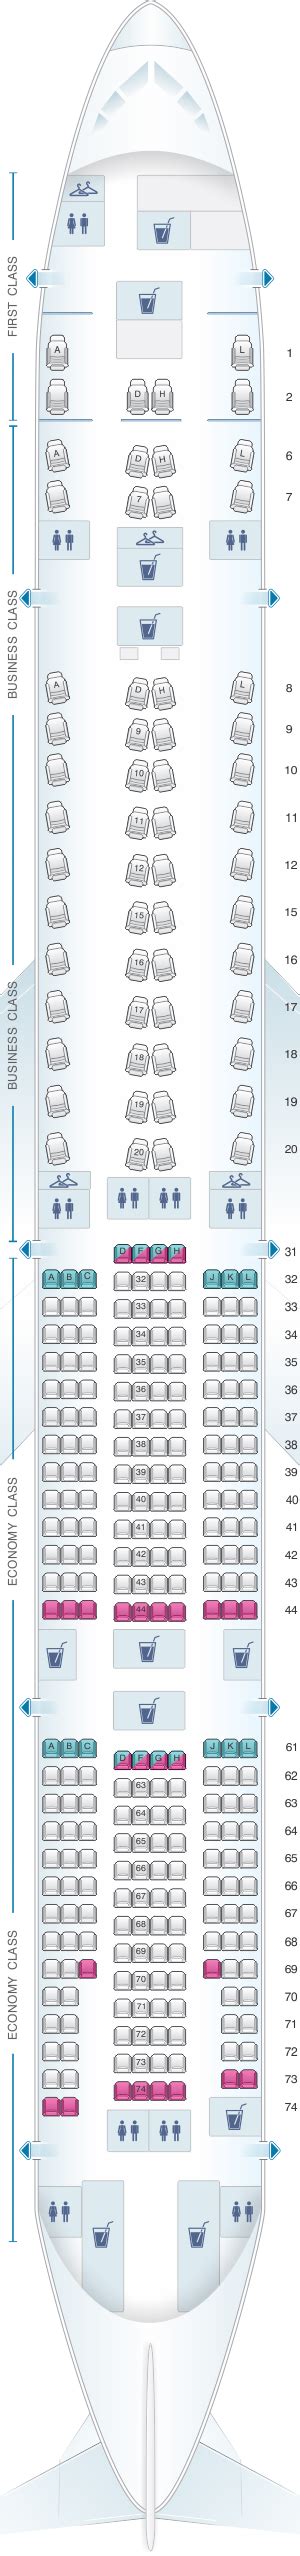 Seat Map China Eastern Airlines Boeing B777 300er Seatmaestro